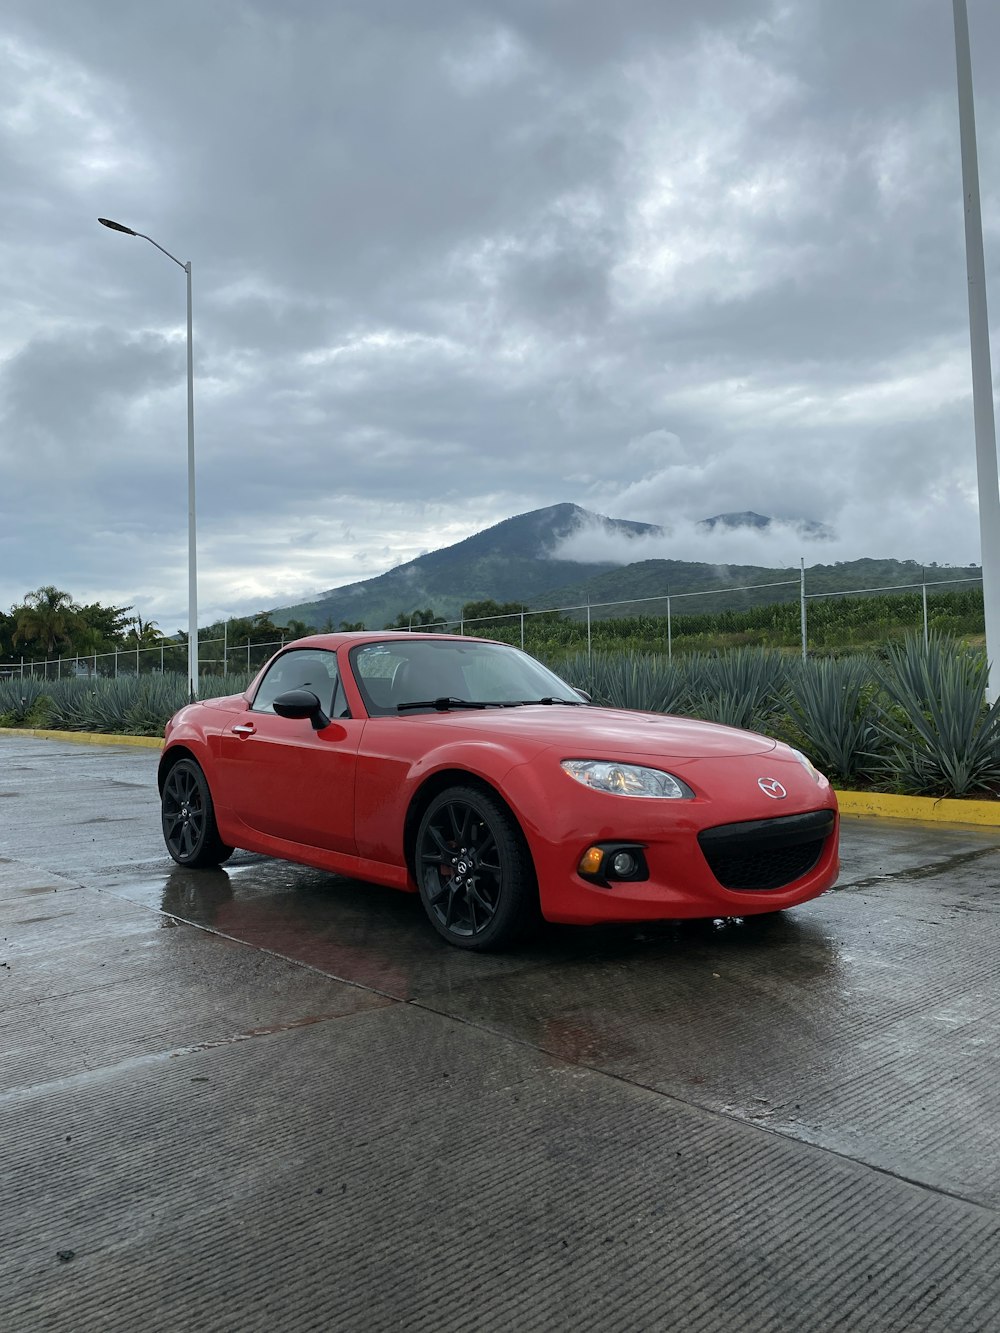 a red sports car parked on a wet road